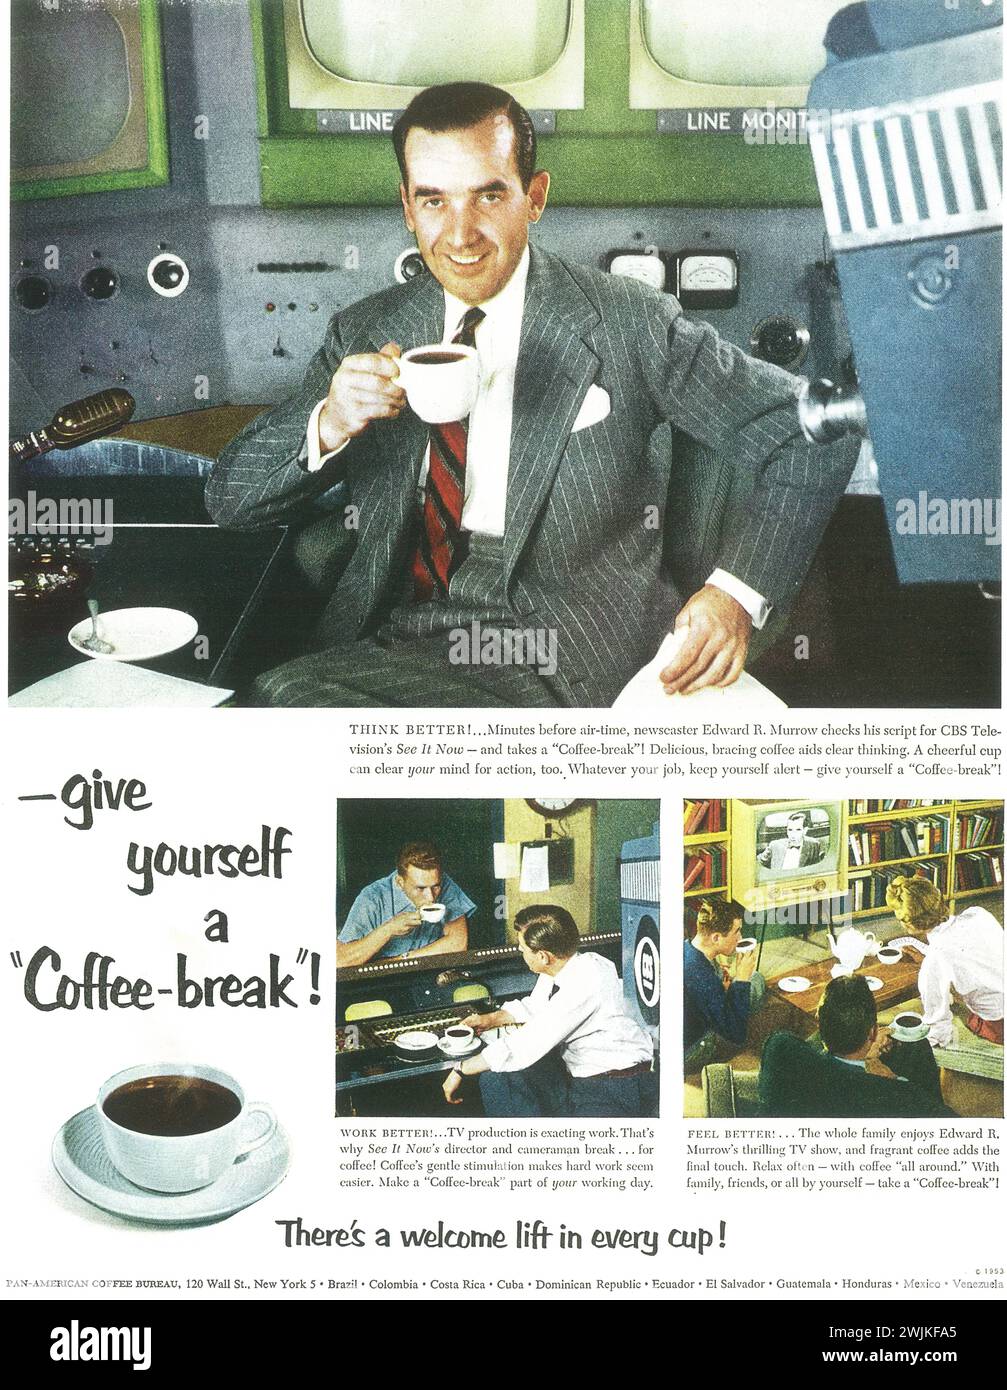 1953 Pan-American Coffee Bureau print ad. 'Give yourself a coffee-break' Coffee ad with endorsement by newscaster Edward R. Murrow. Stock Photo